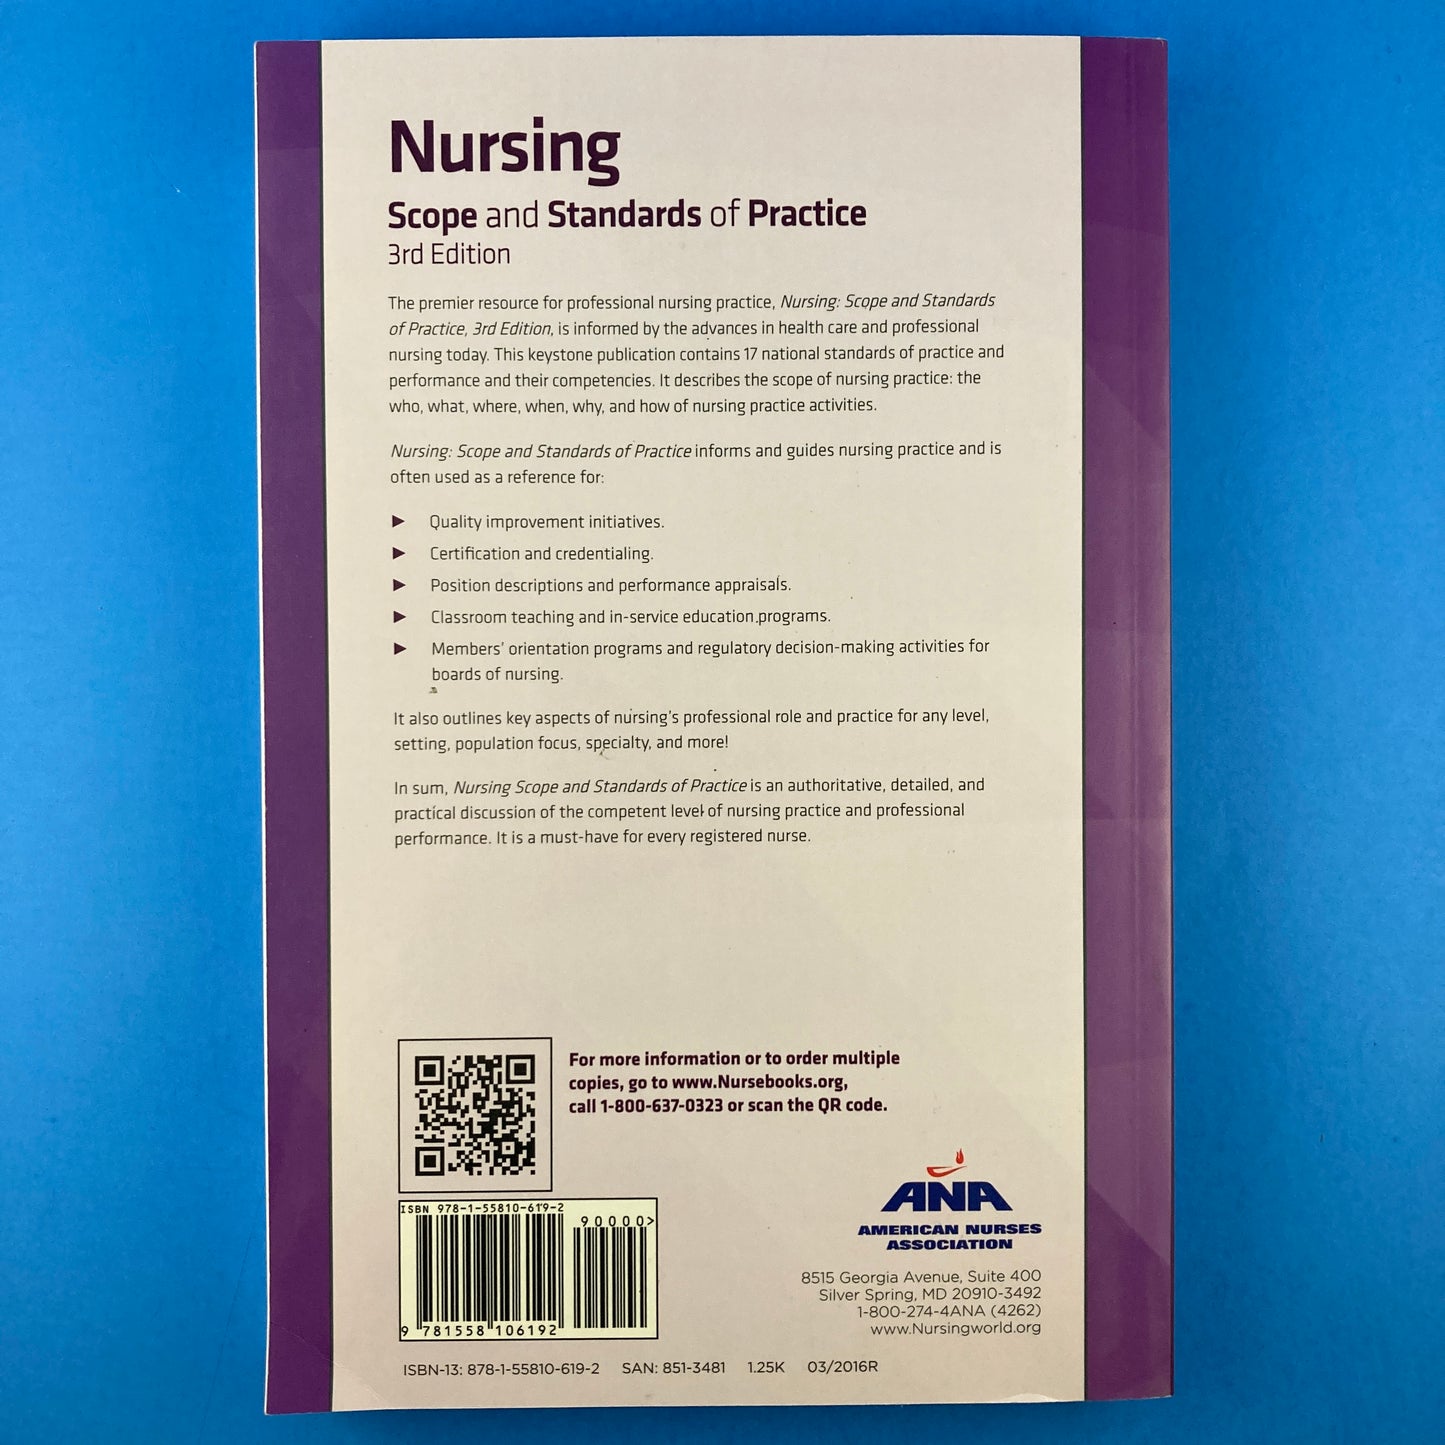 Nursing: Scope and Standards of Practice